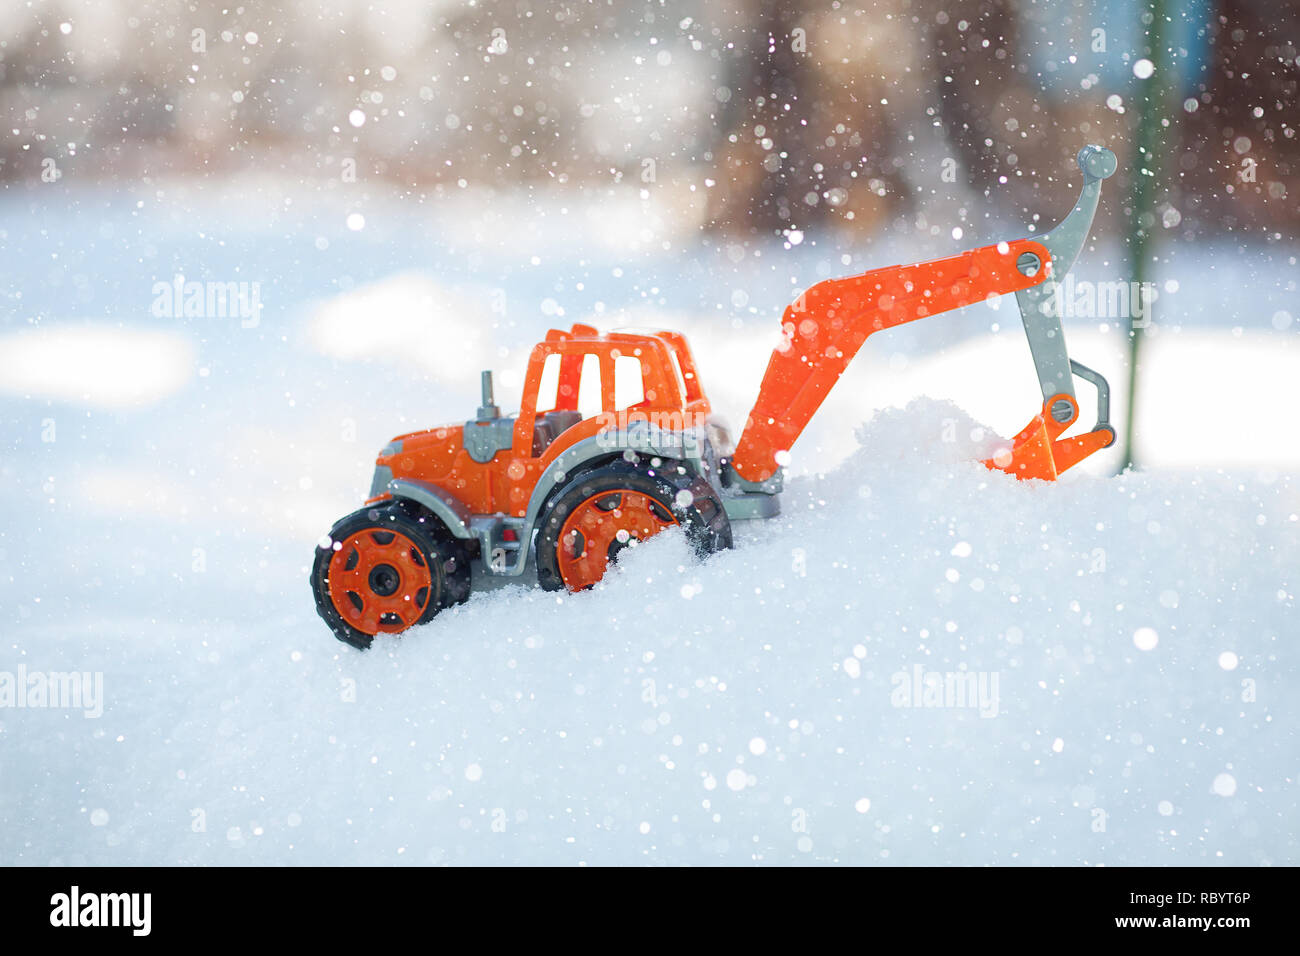 Orange toy tractor with large black wheels close-up, standing in the snow. Stock Photo